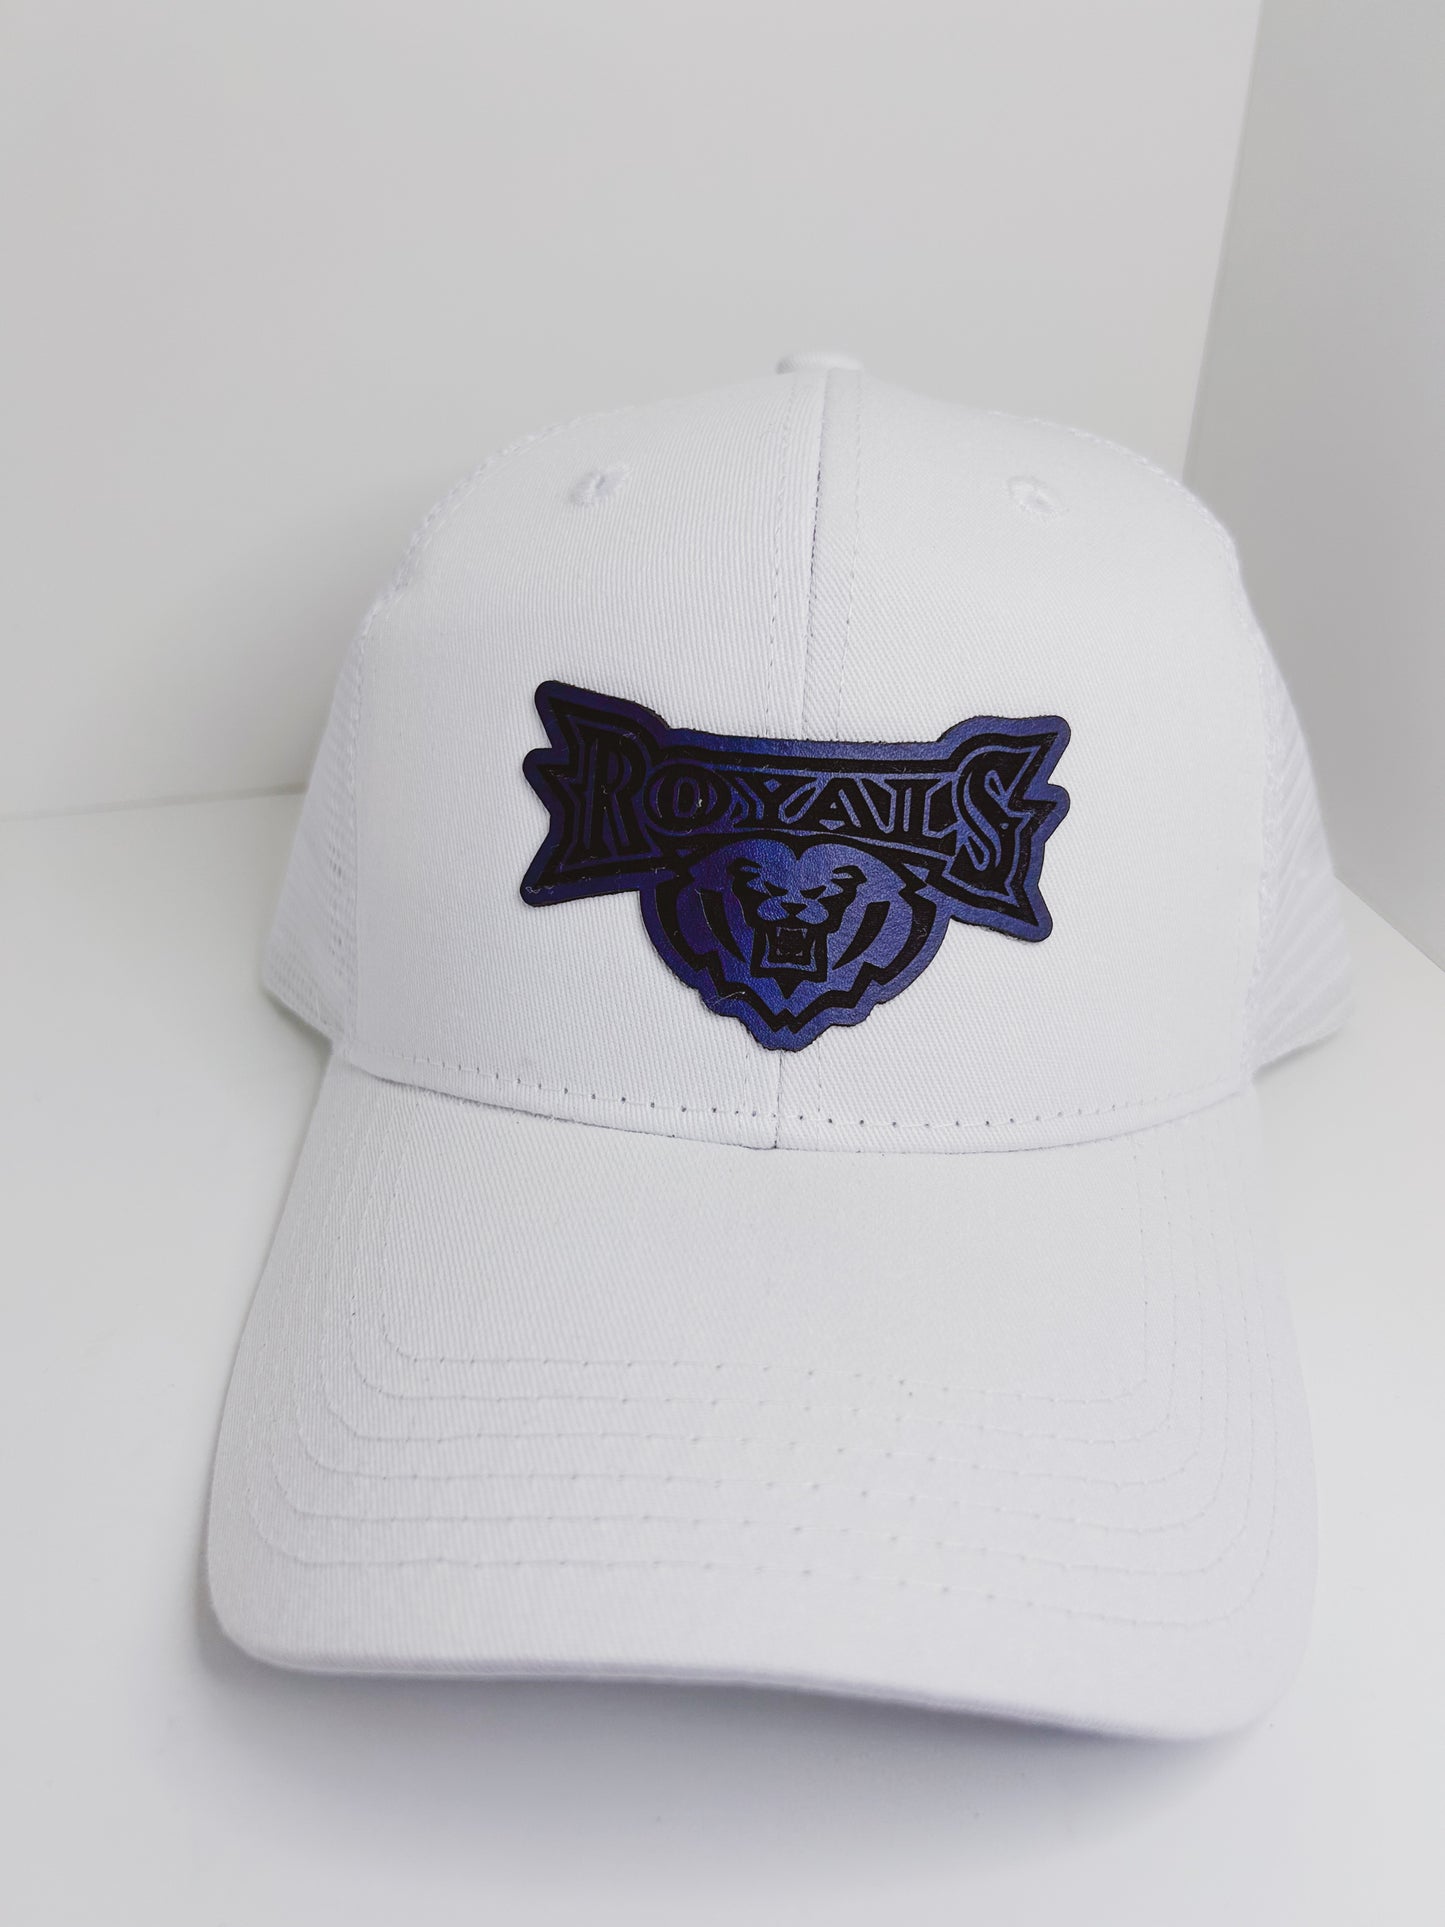 HSE Royals - White Baseball Hat - Royals Patch